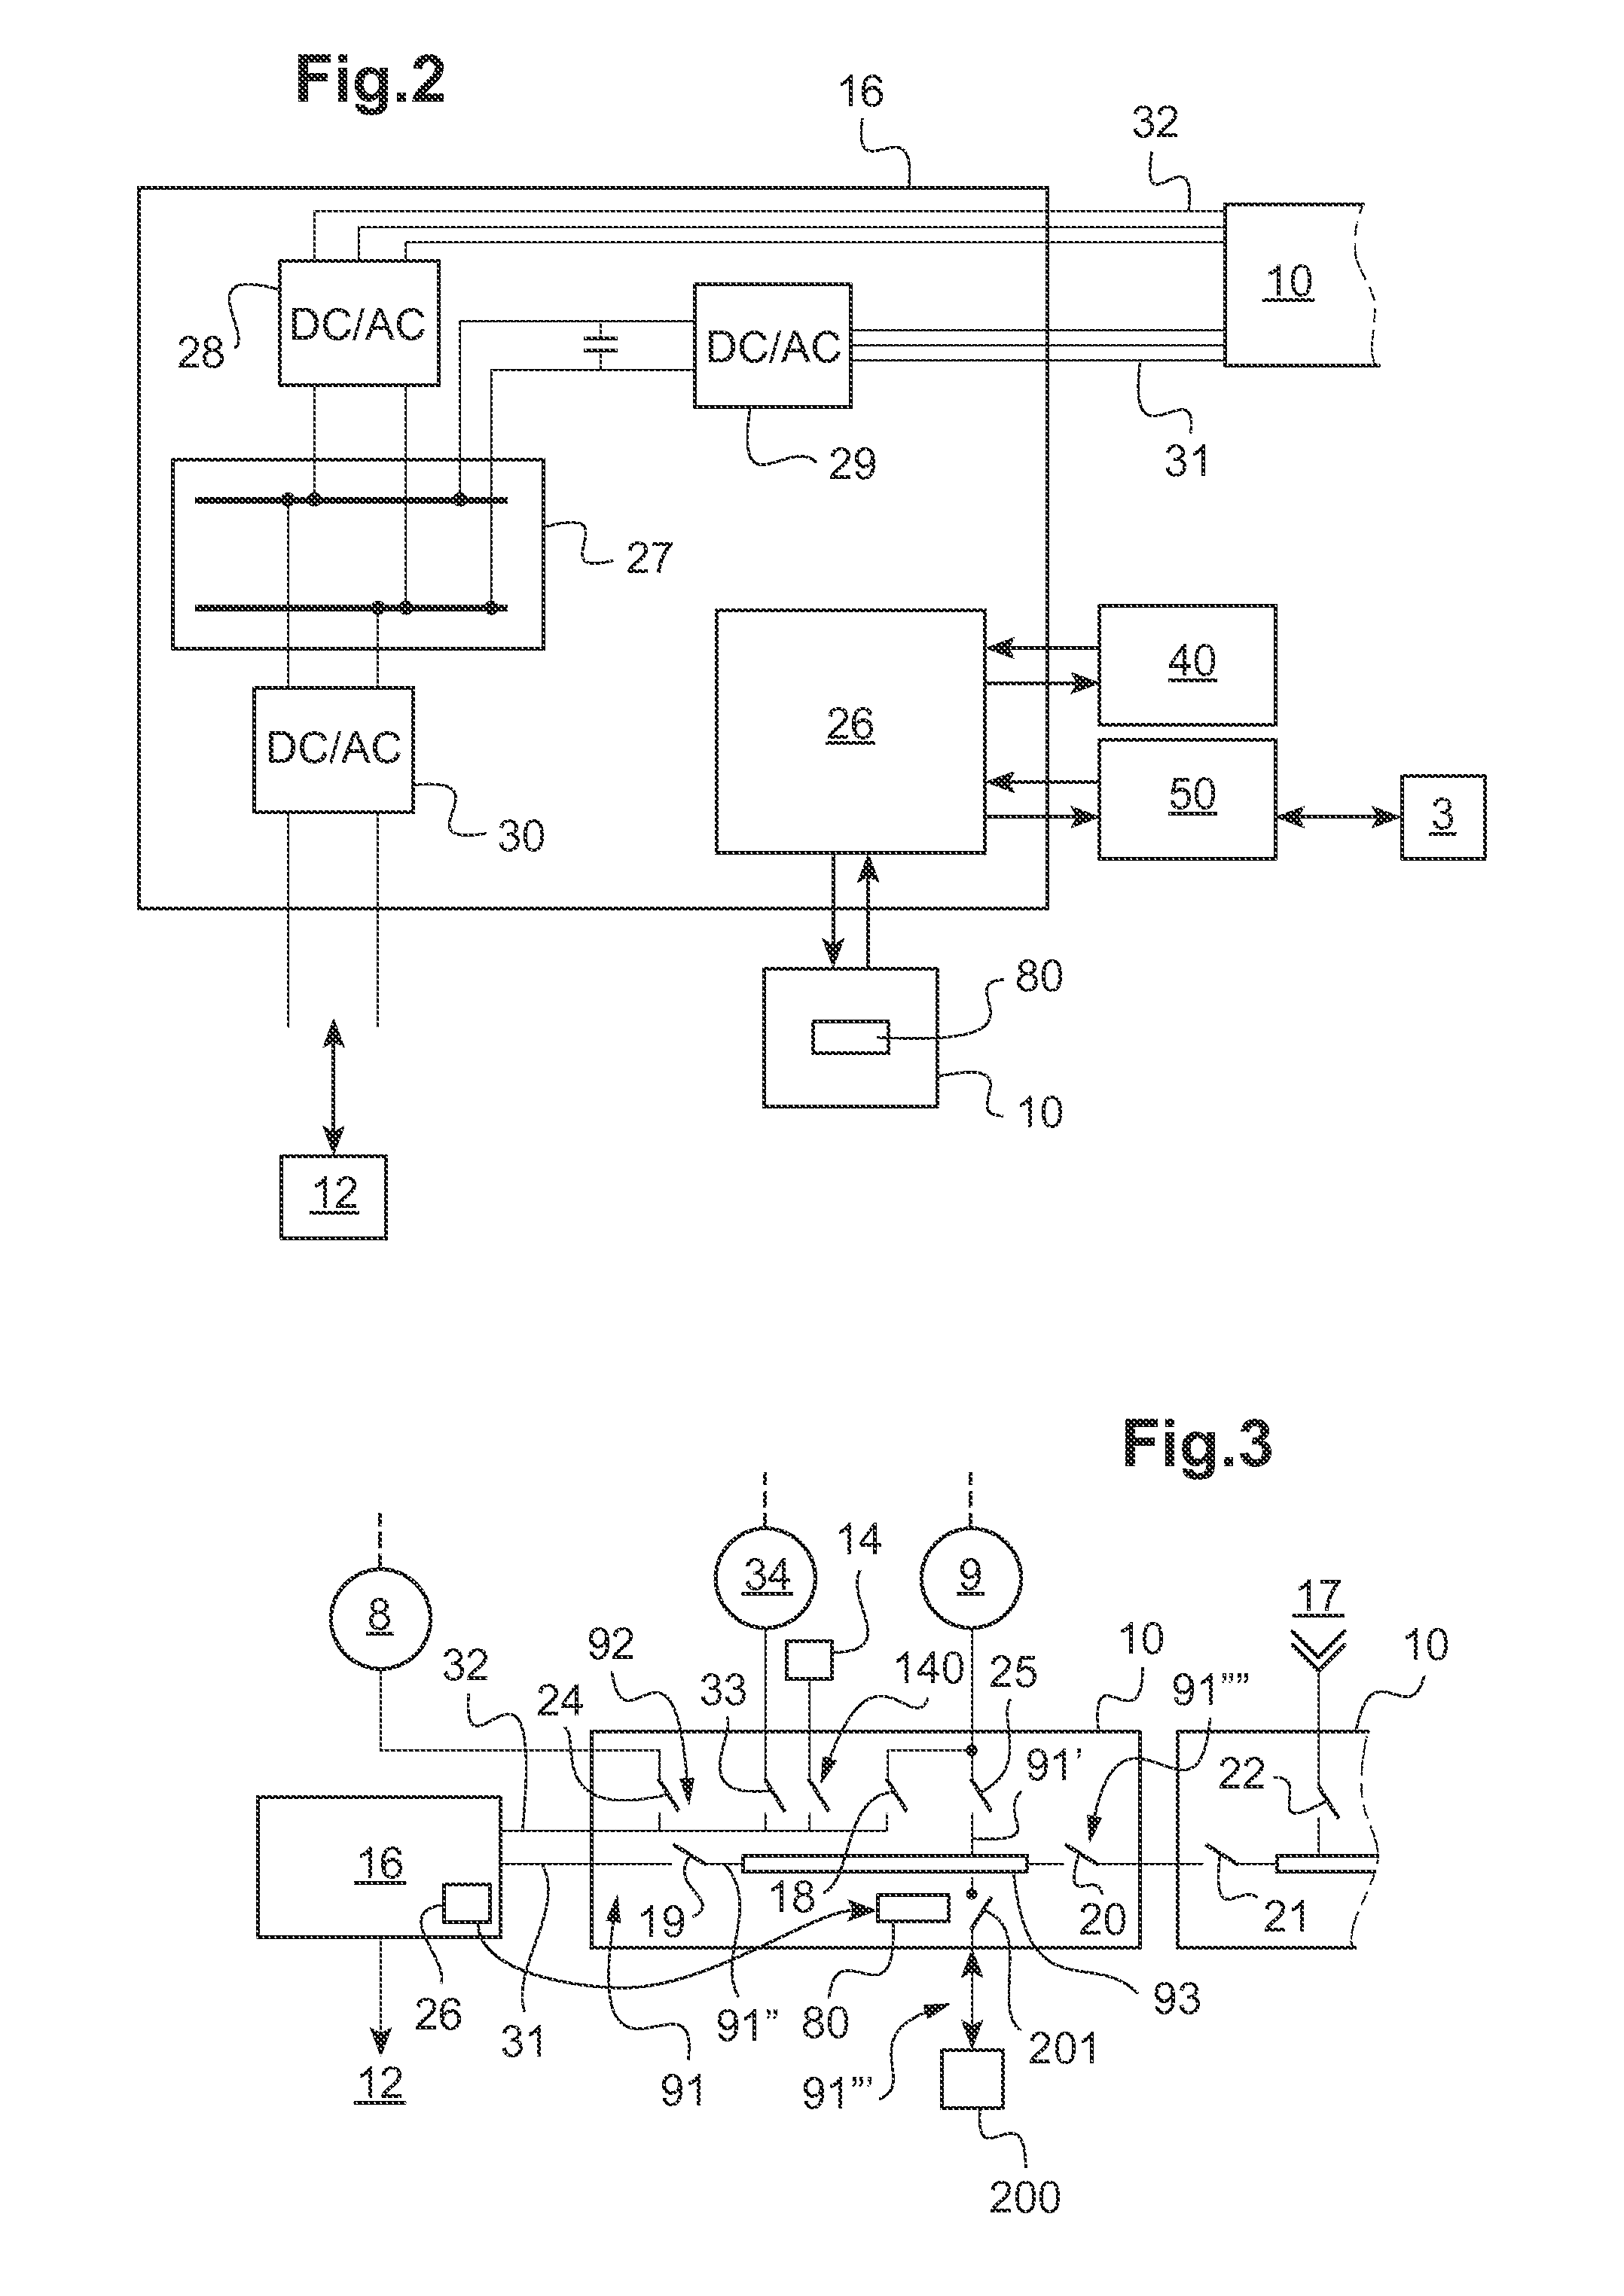 Electrical architecture for an aircraft, an aircraft, and a method of using it